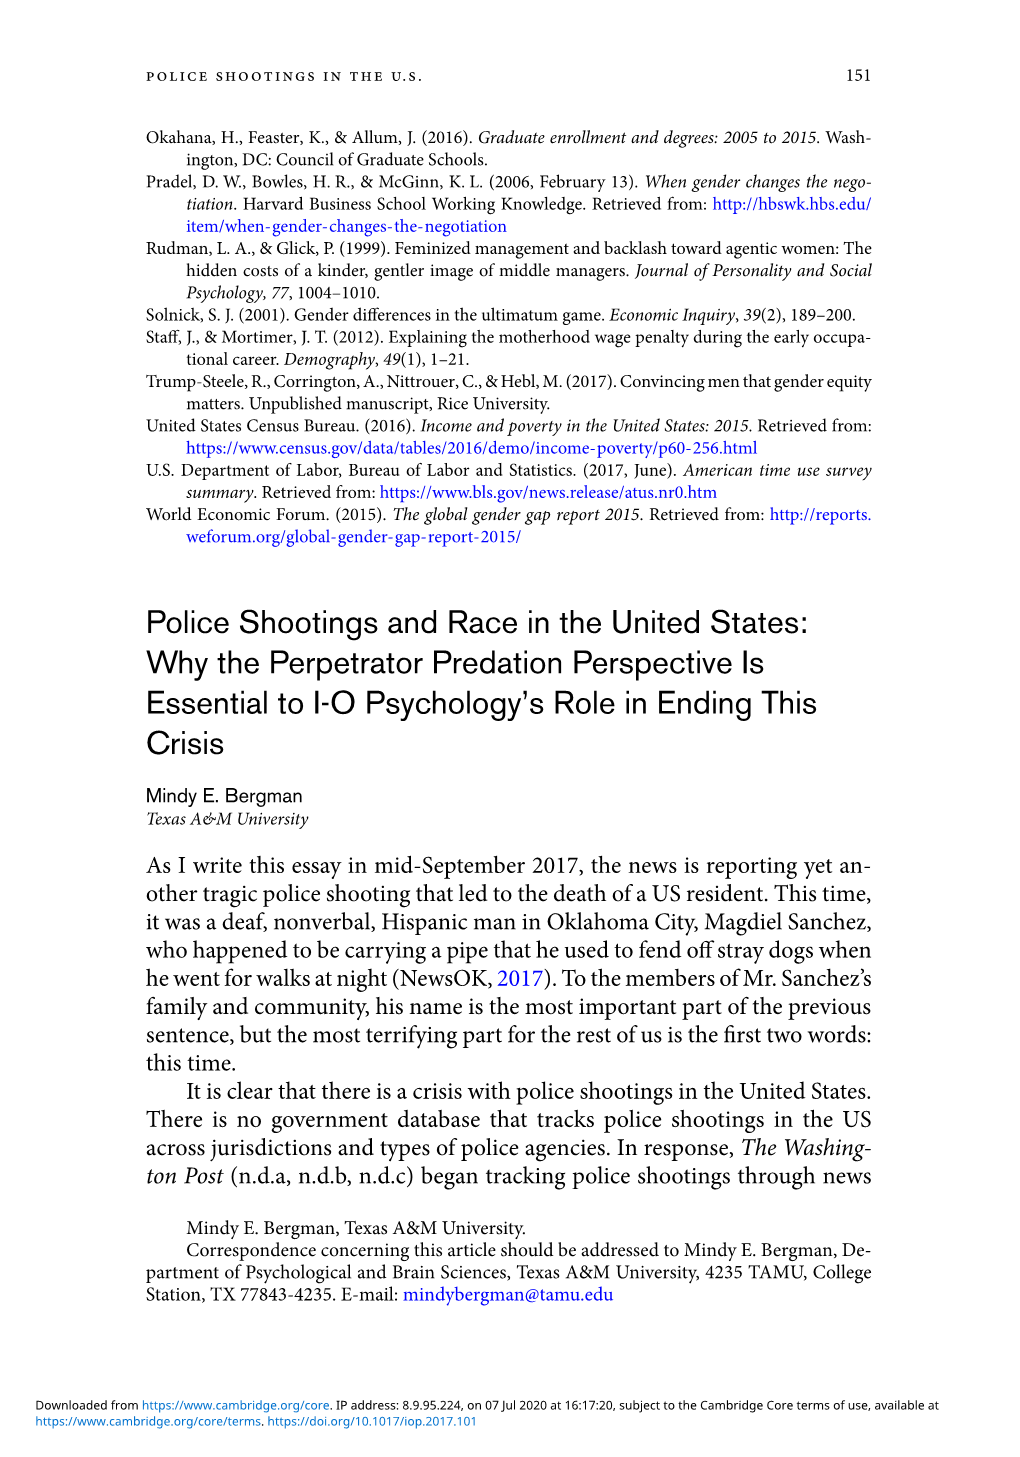 Police Shootings and Race in the United States: Why the Perpetrator Predation Perspective Is Essential to I-O Psychology’S Role in Ending This Crisis